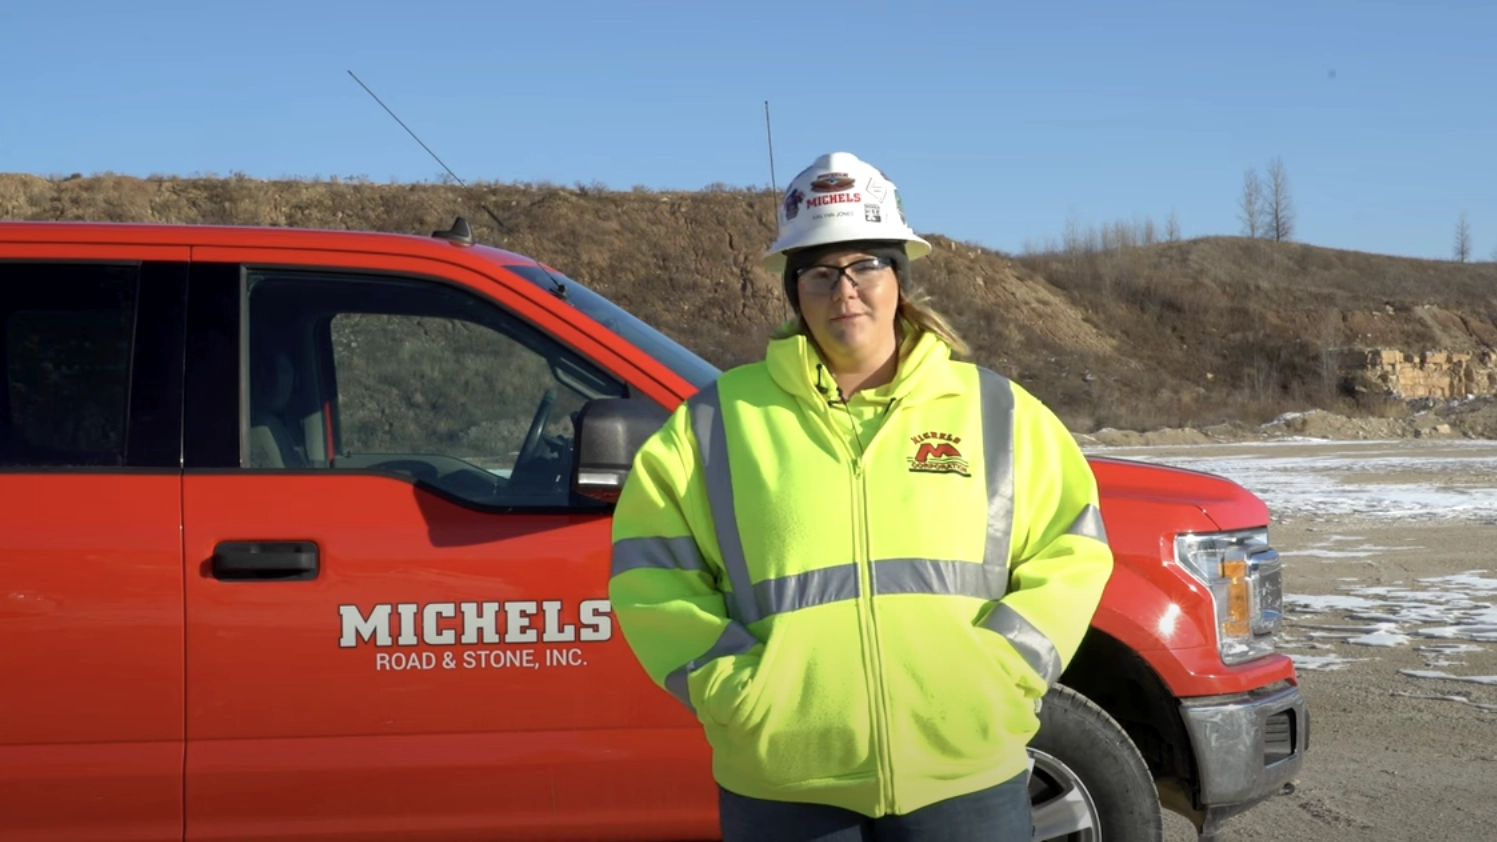 A woman wearing a vi-vis jacket and hardhat stands next to a red Michels Road & Stone Truck.